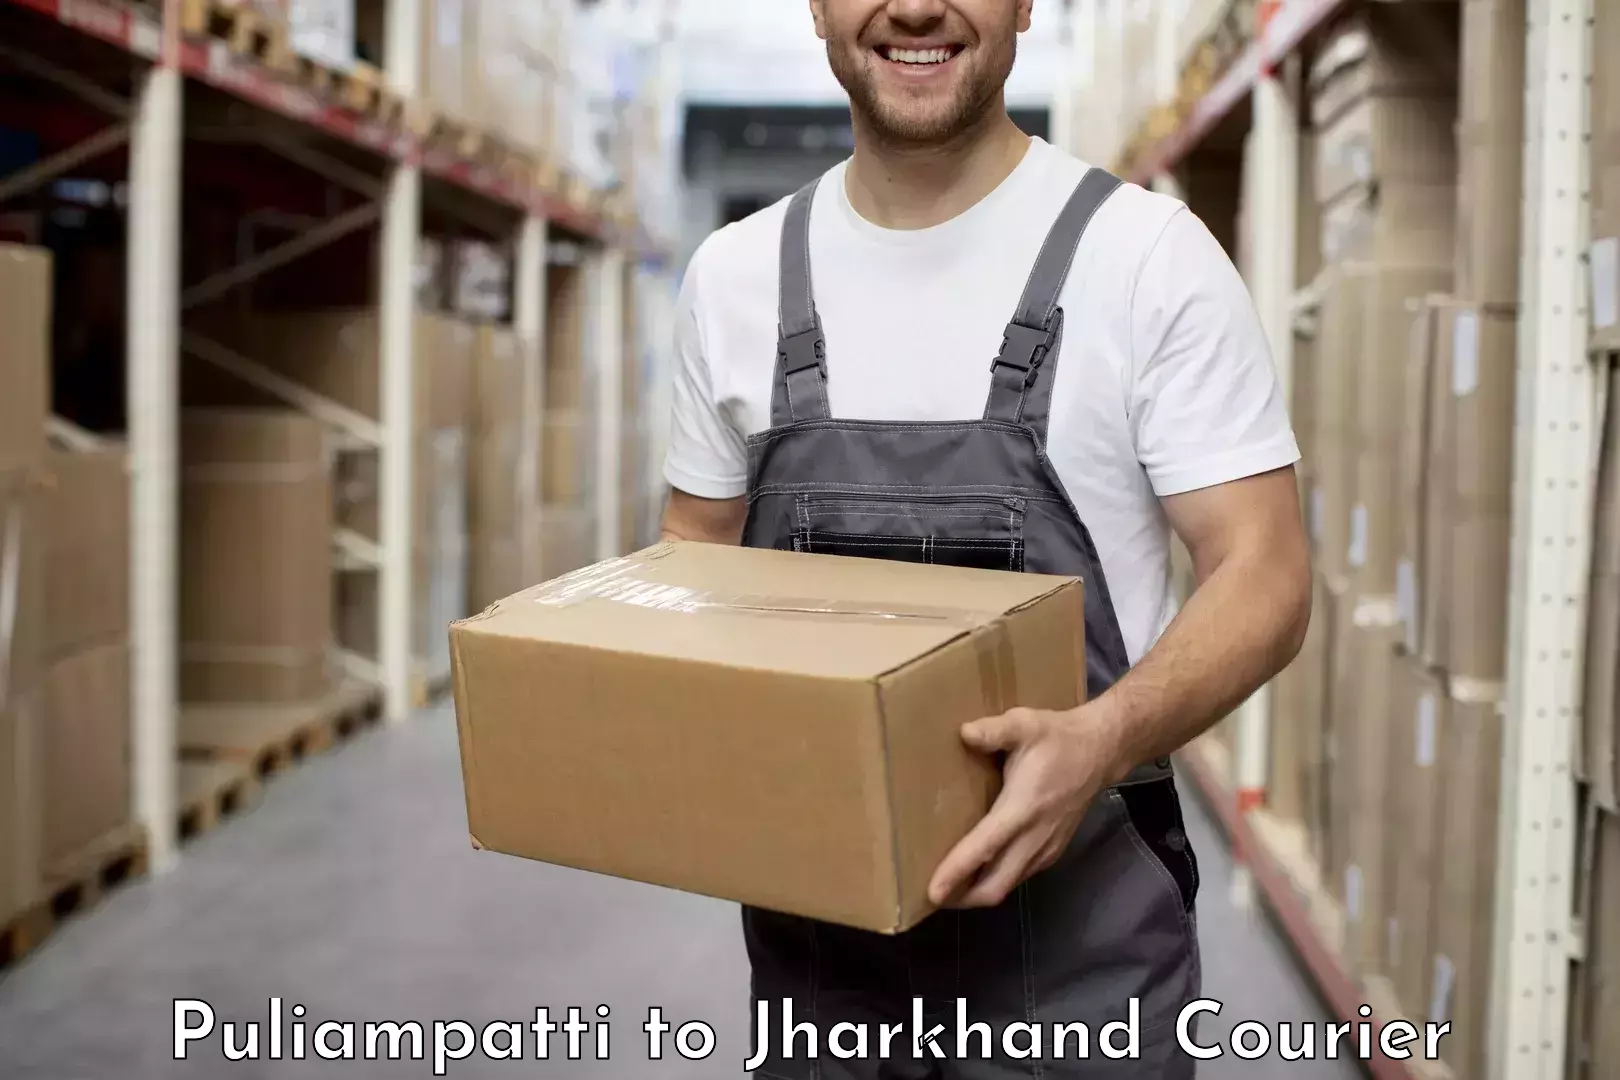 Package delivery network Puliampatti to Tandwa